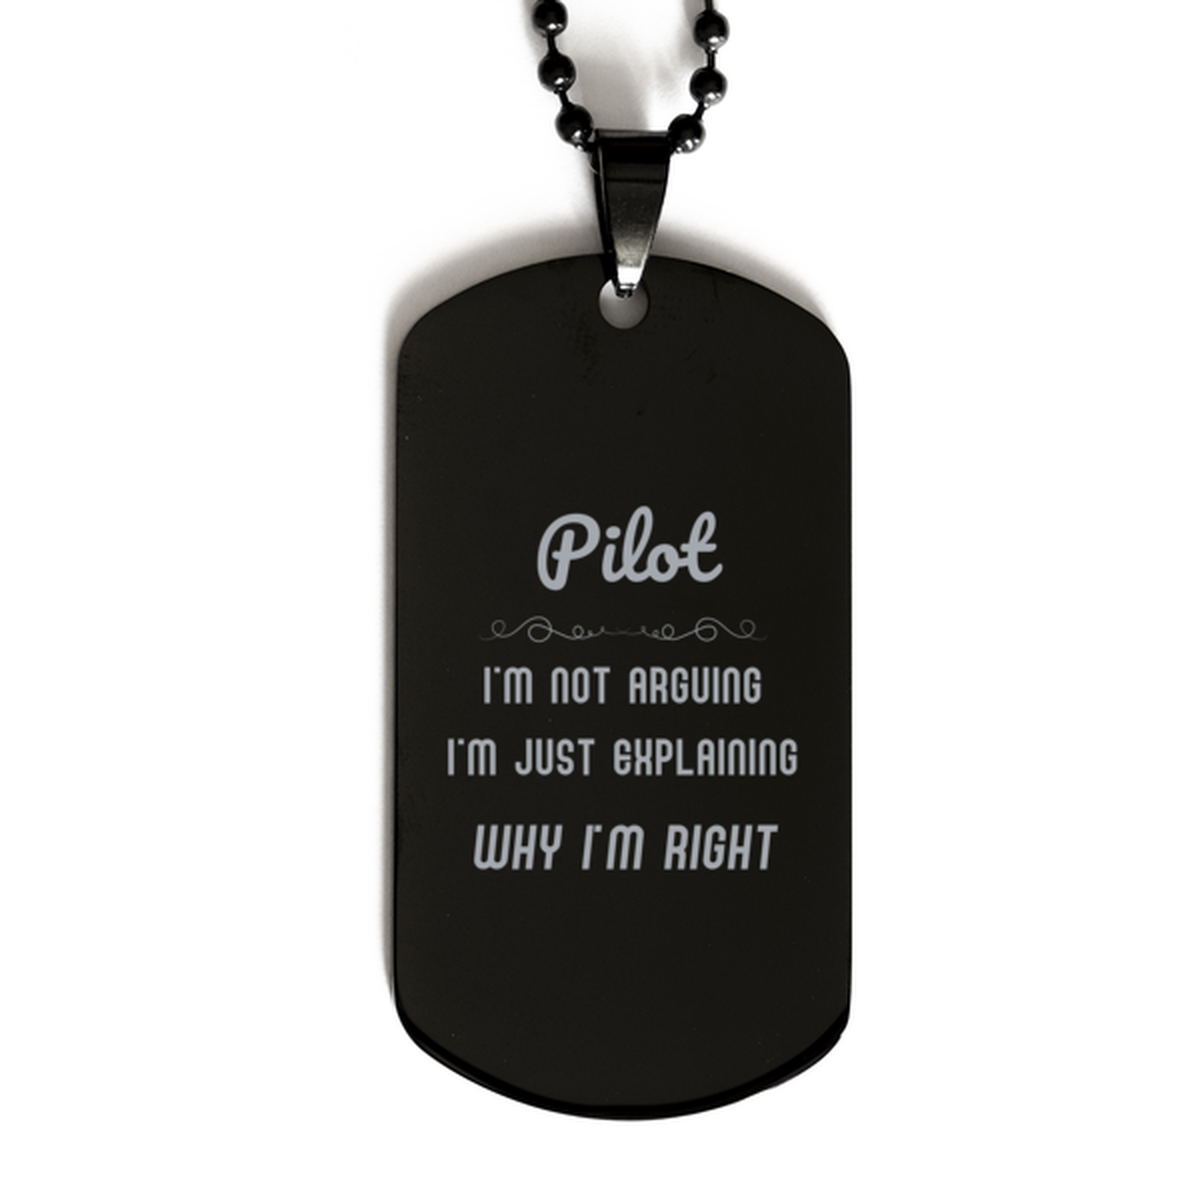 Pilot I'm not Arguing. I'm Just Explaining Why I'm RIGHT Black Dog Tag, Funny Saying Quote Pilot Gifts For Pilot Graduation Birthday Christmas Gifts for Men Women Coworker